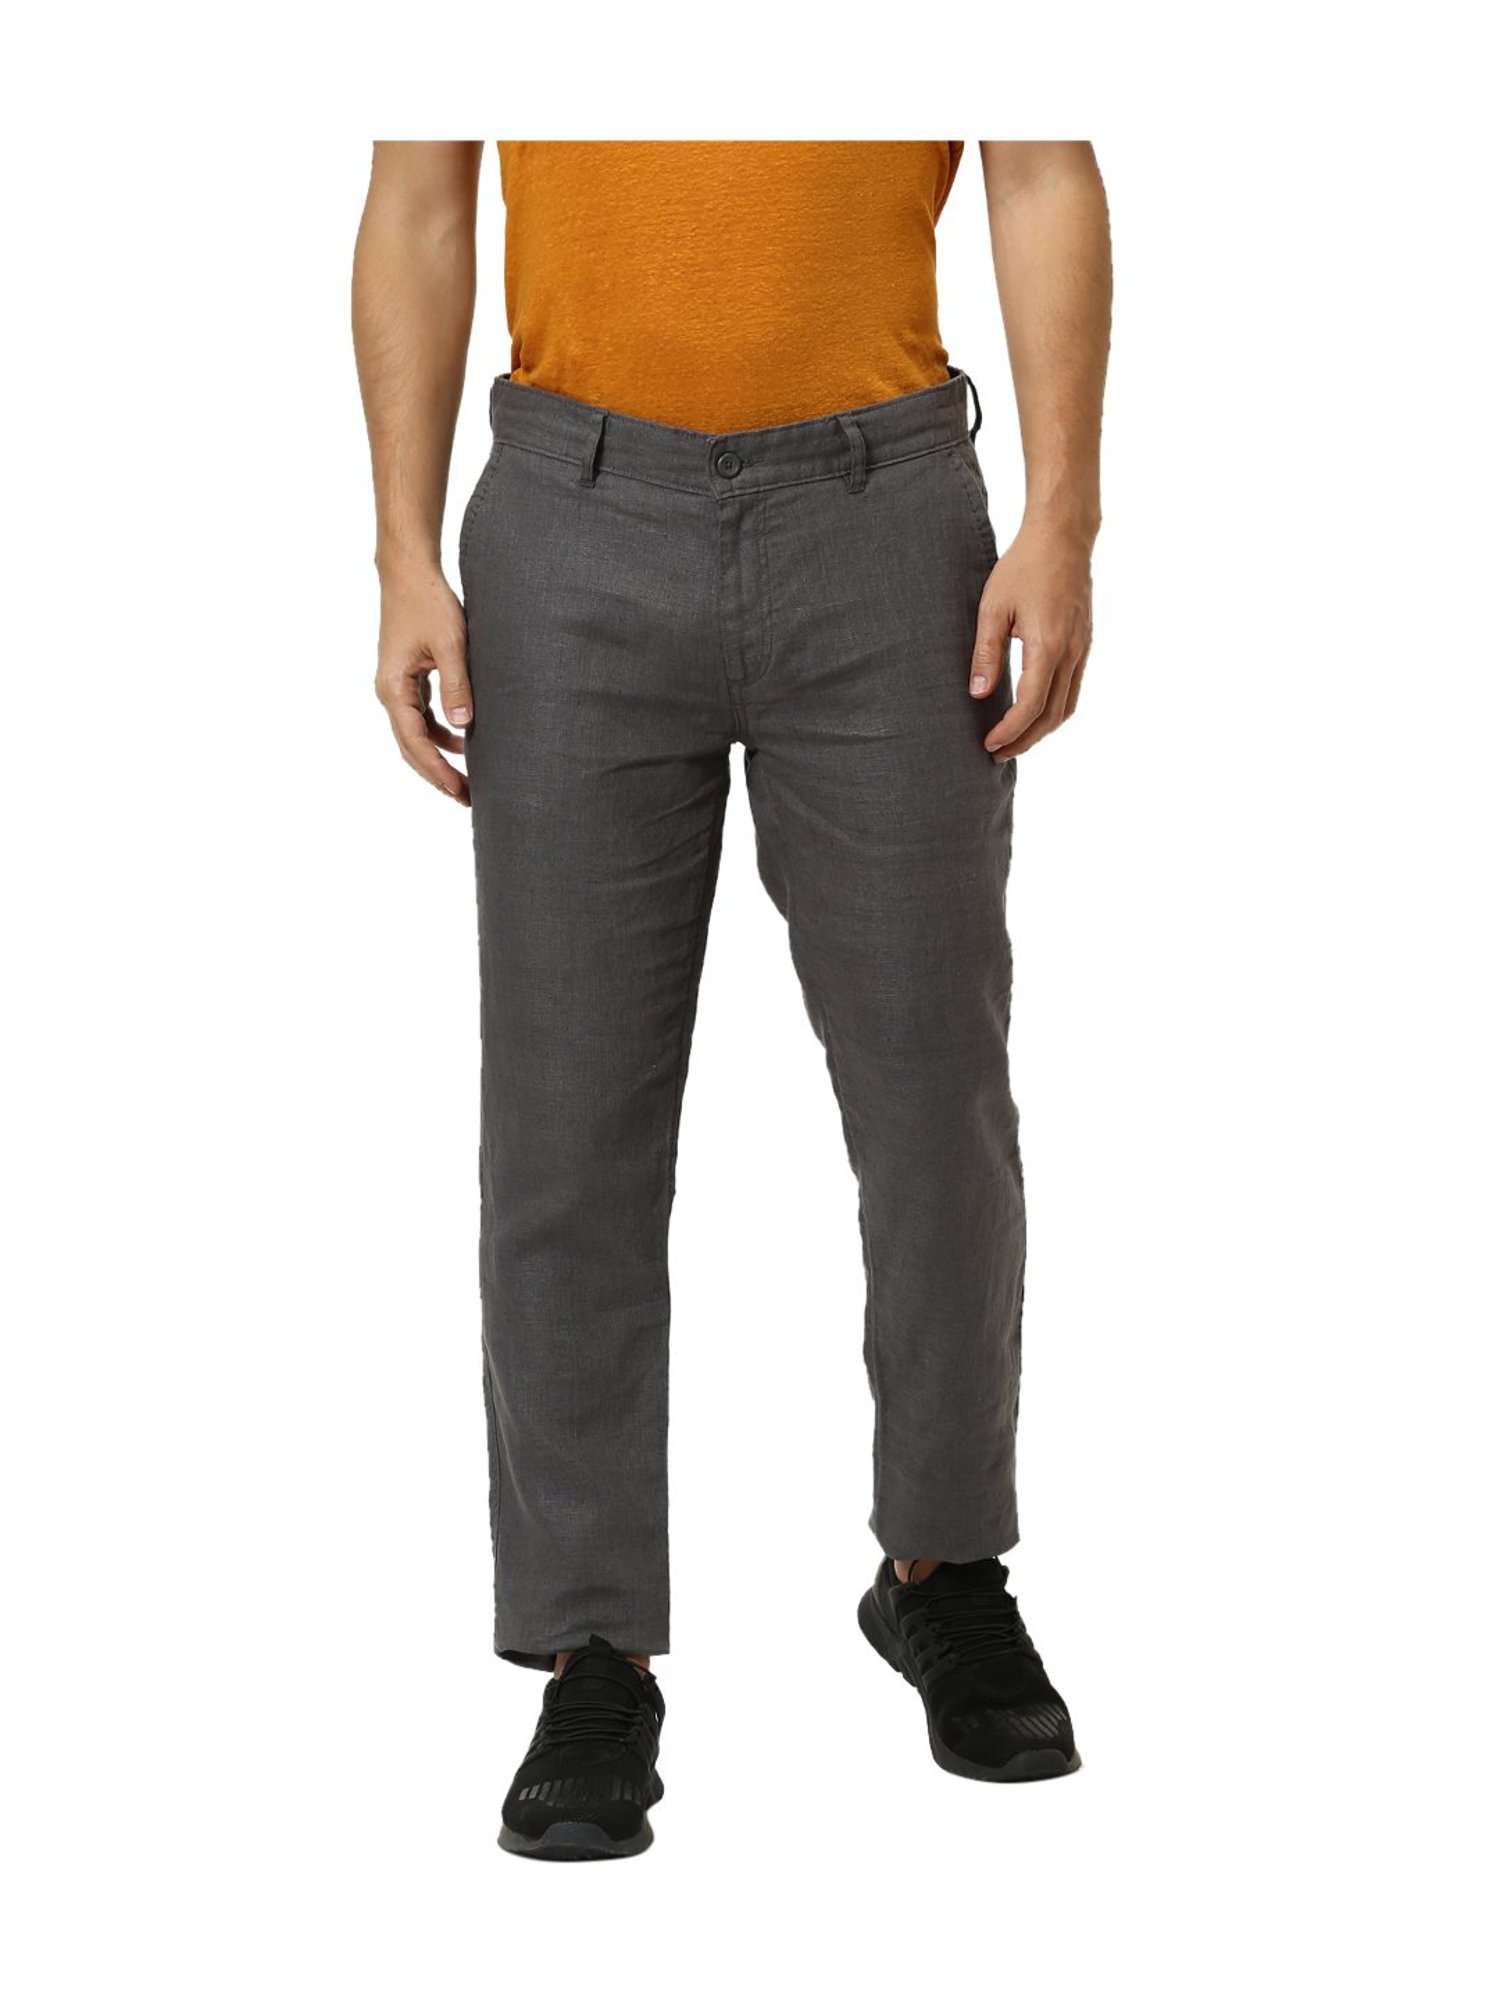 CELIO Casual Trousers  Buy Celio Mens Olive Casual Trousers Online   Nykaa Fashion